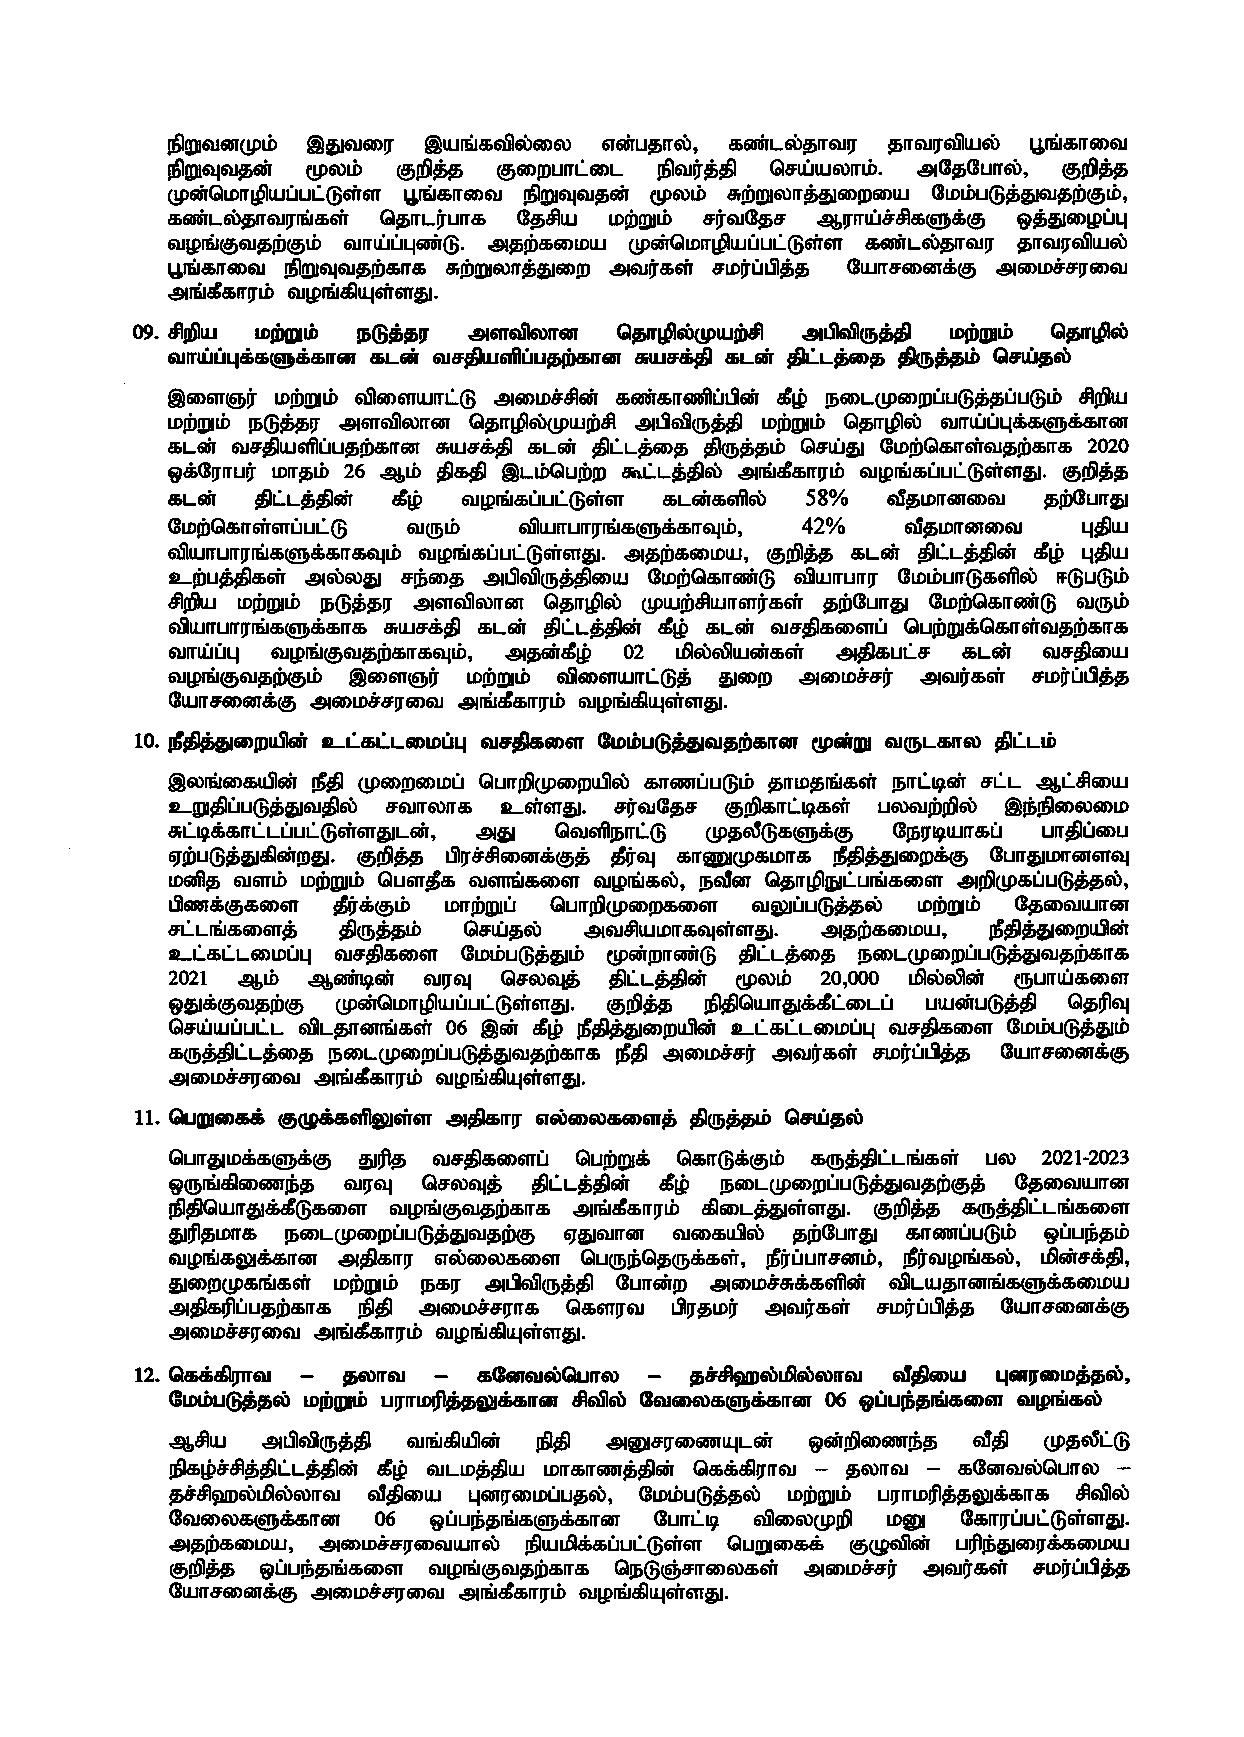 Cabinet Decision on 01.03.2021 Tamil page 003